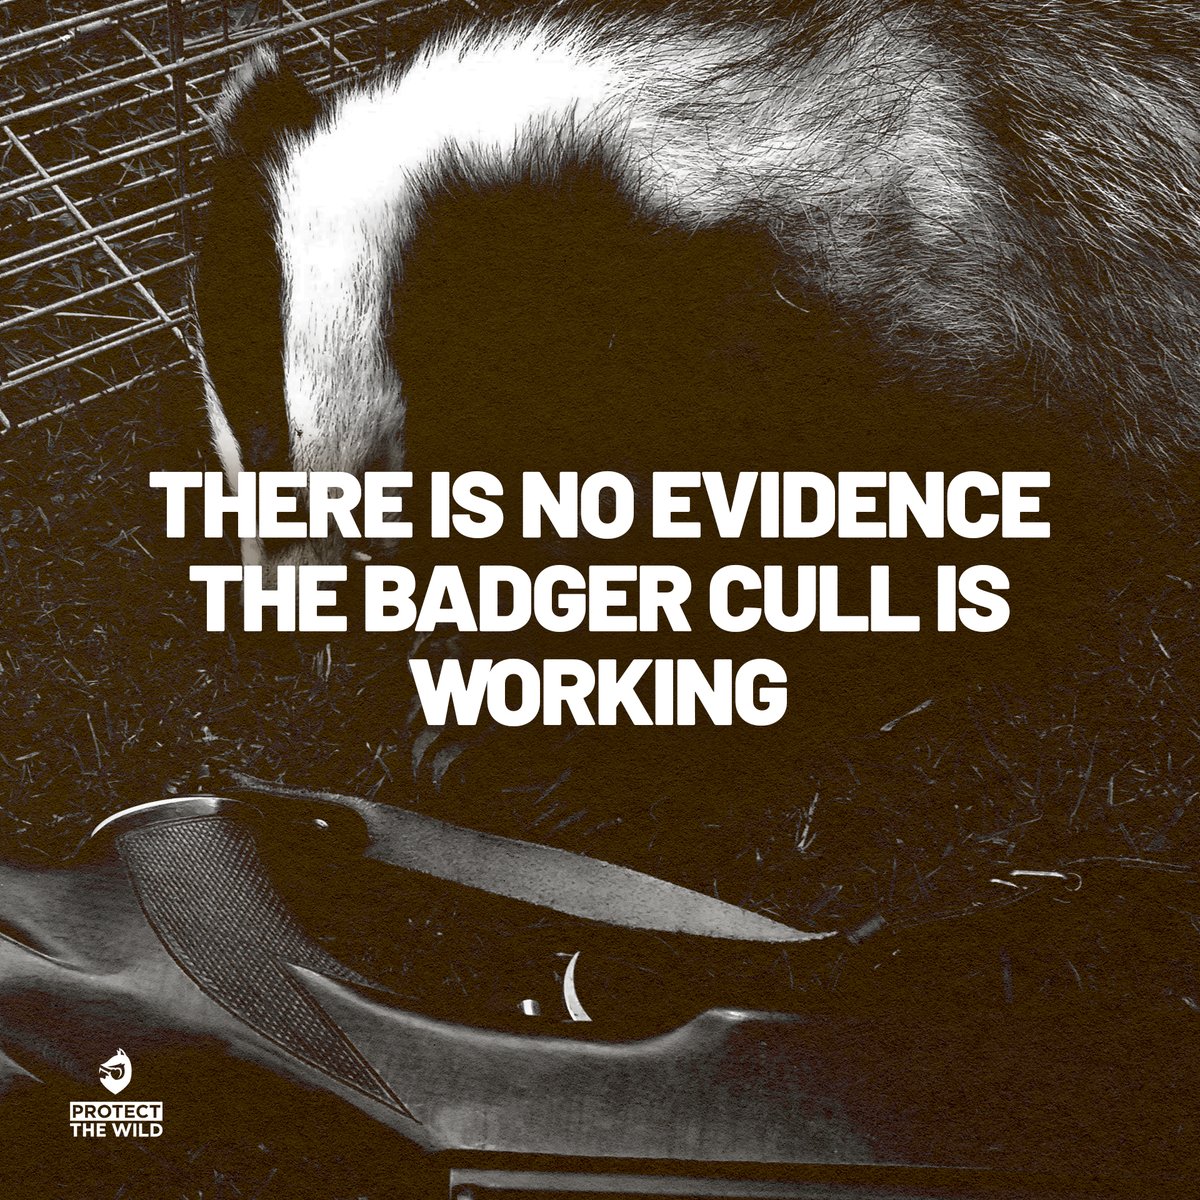 Defra’s push to prove that badger culling alone is responsible for reducing bTB incidents in cattle is misleading. Improved bTB testing, cattle movement controls and increased biosecurity measures will be key factors in lowering the spread of bTB in and around the cull zones.